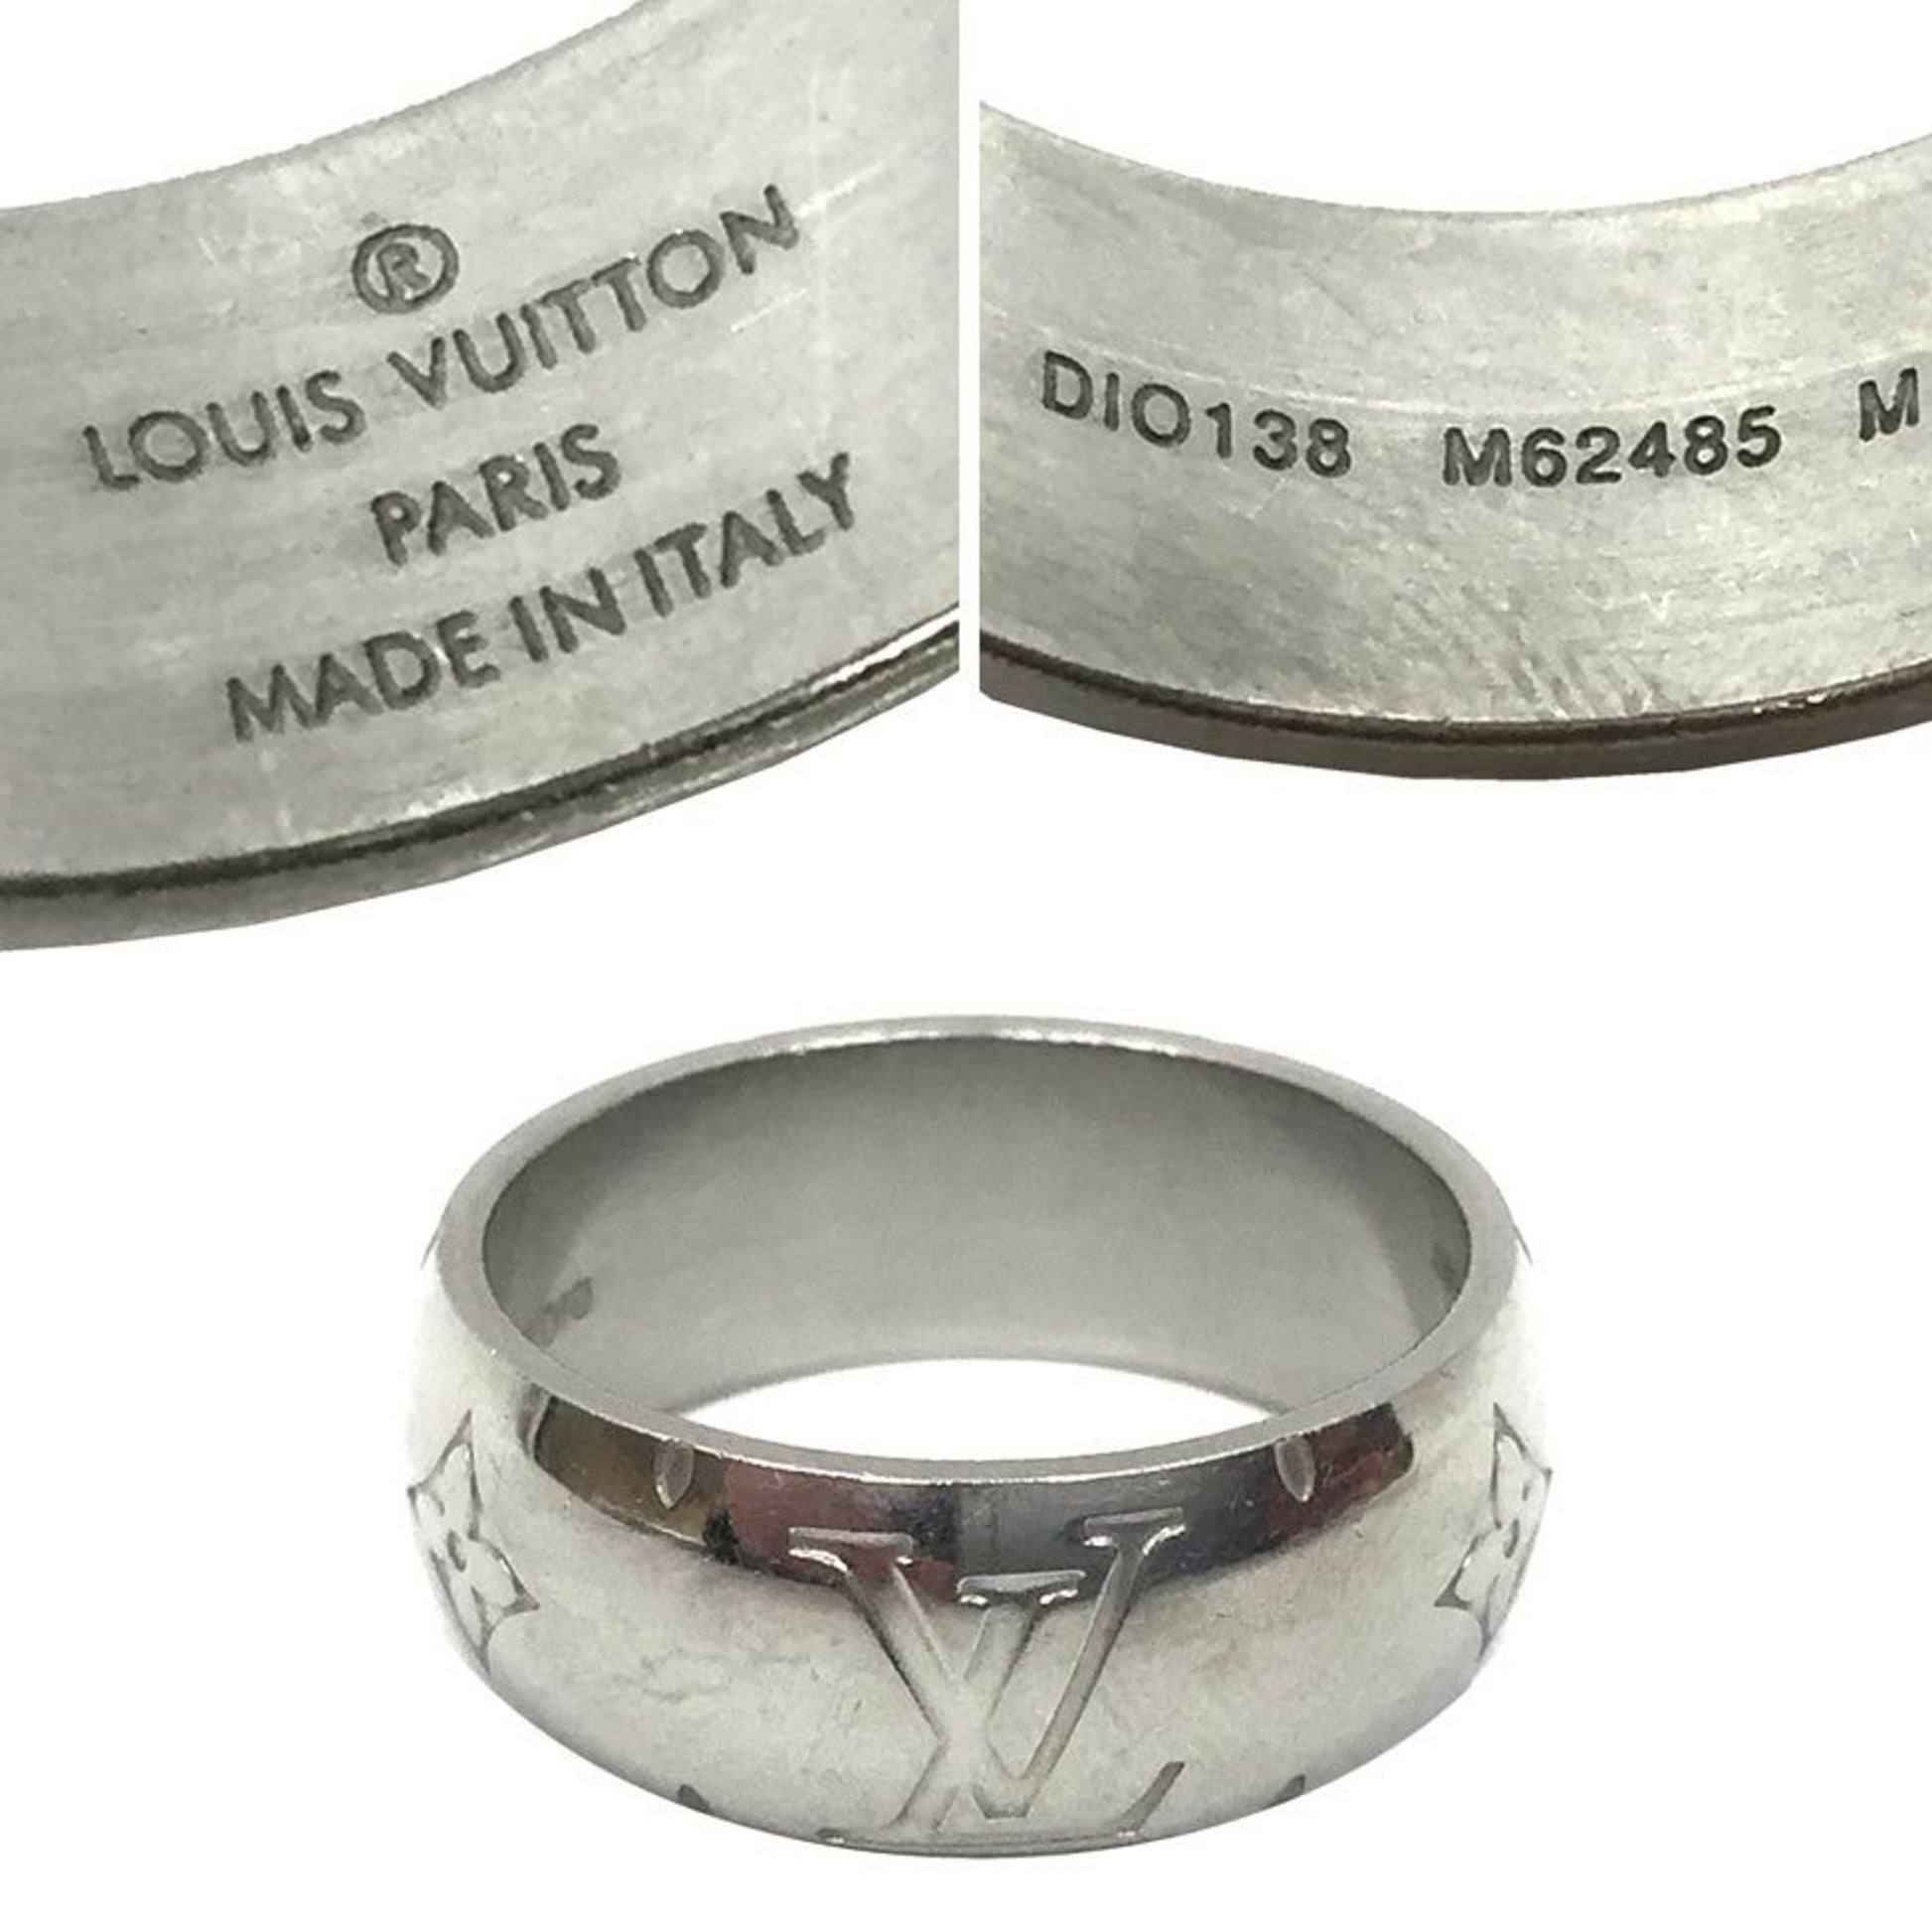 LOUIS VUITTON LOUIS VUITTON Ring Necklace metal Silver Used LV  M62485｜Product Code：2118500007981｜BRAND OFF Online Store